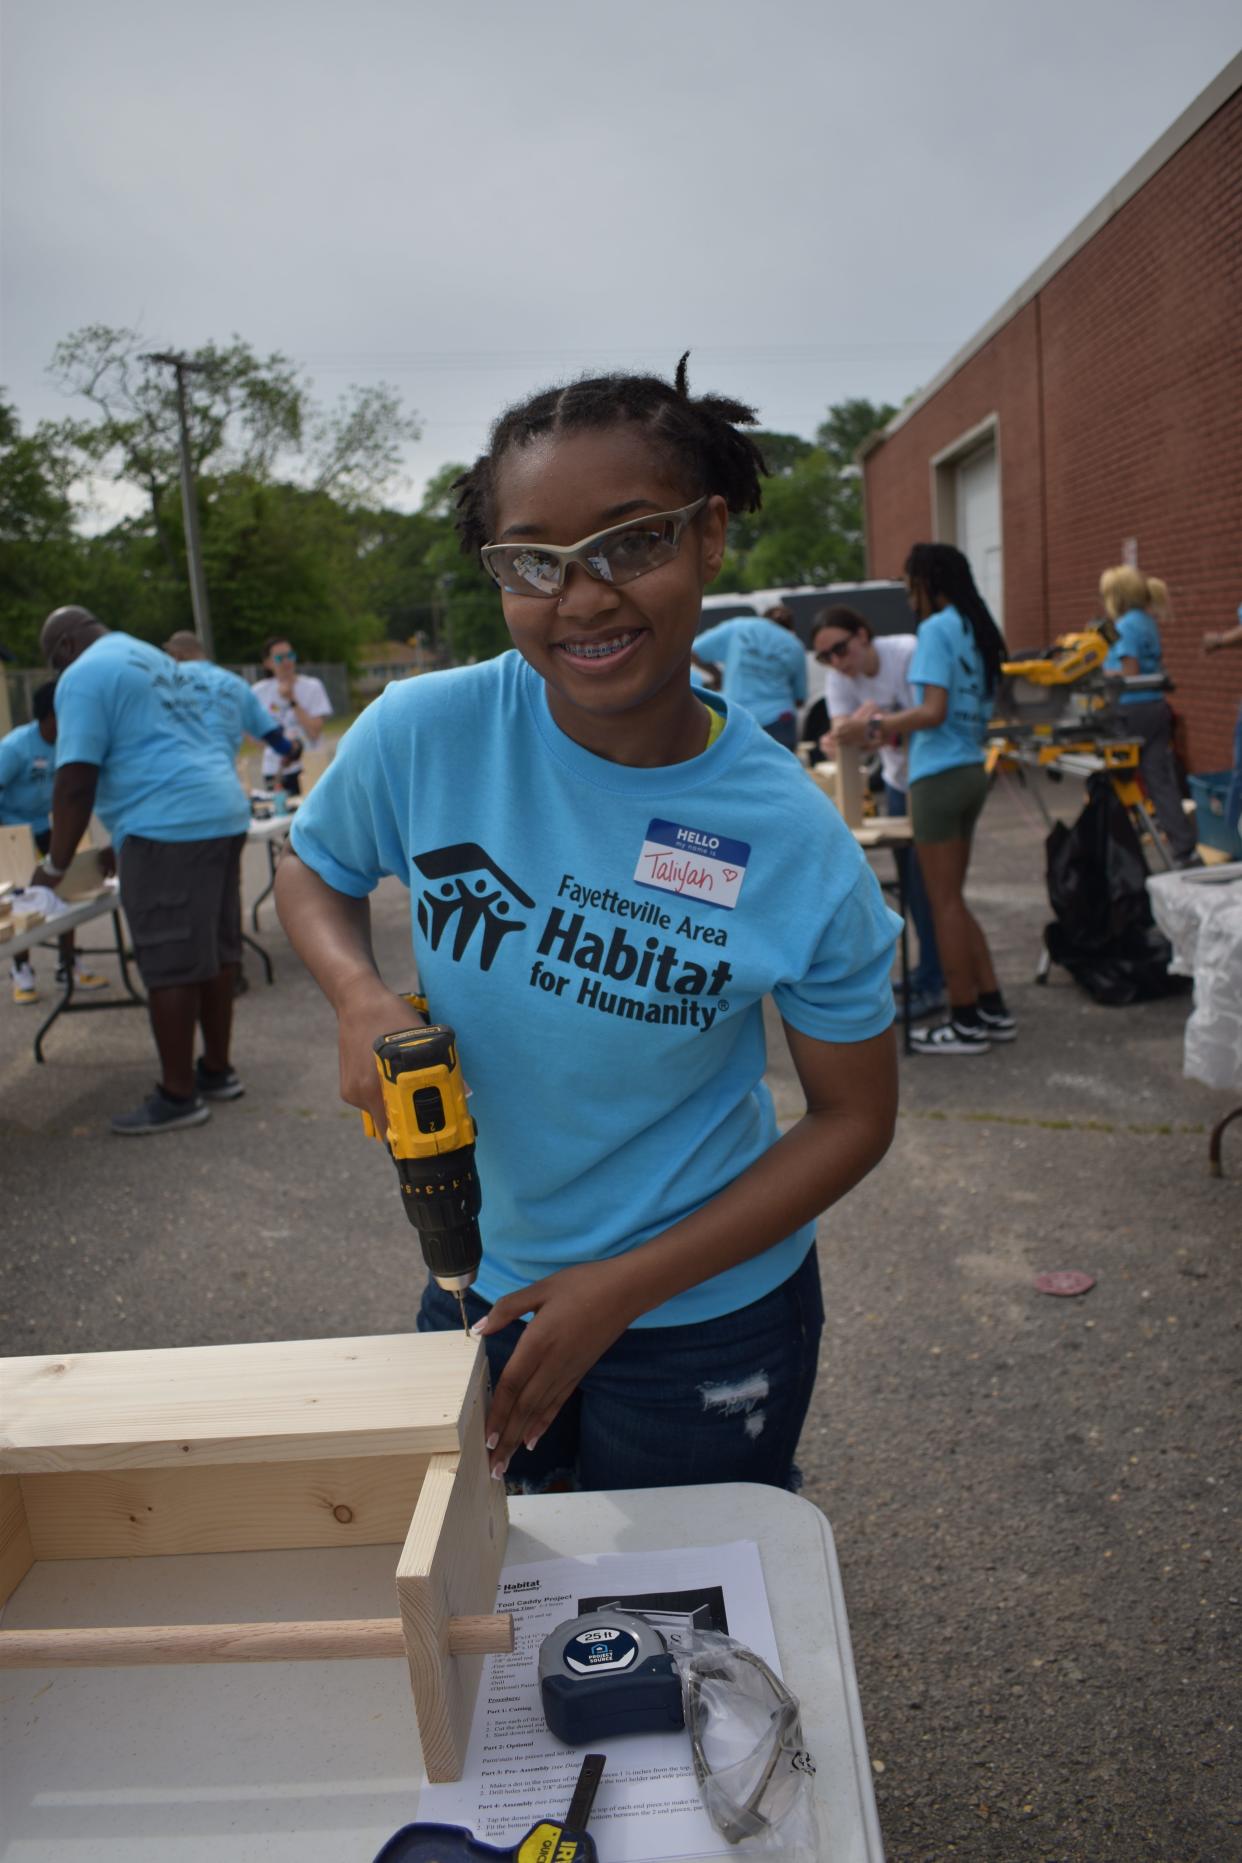 Young people in Trade Days learn the skills of home repair and tool safety. The program is a partnership between Fayetteville Area Habitat for Humanity and Cumberland County Schools.